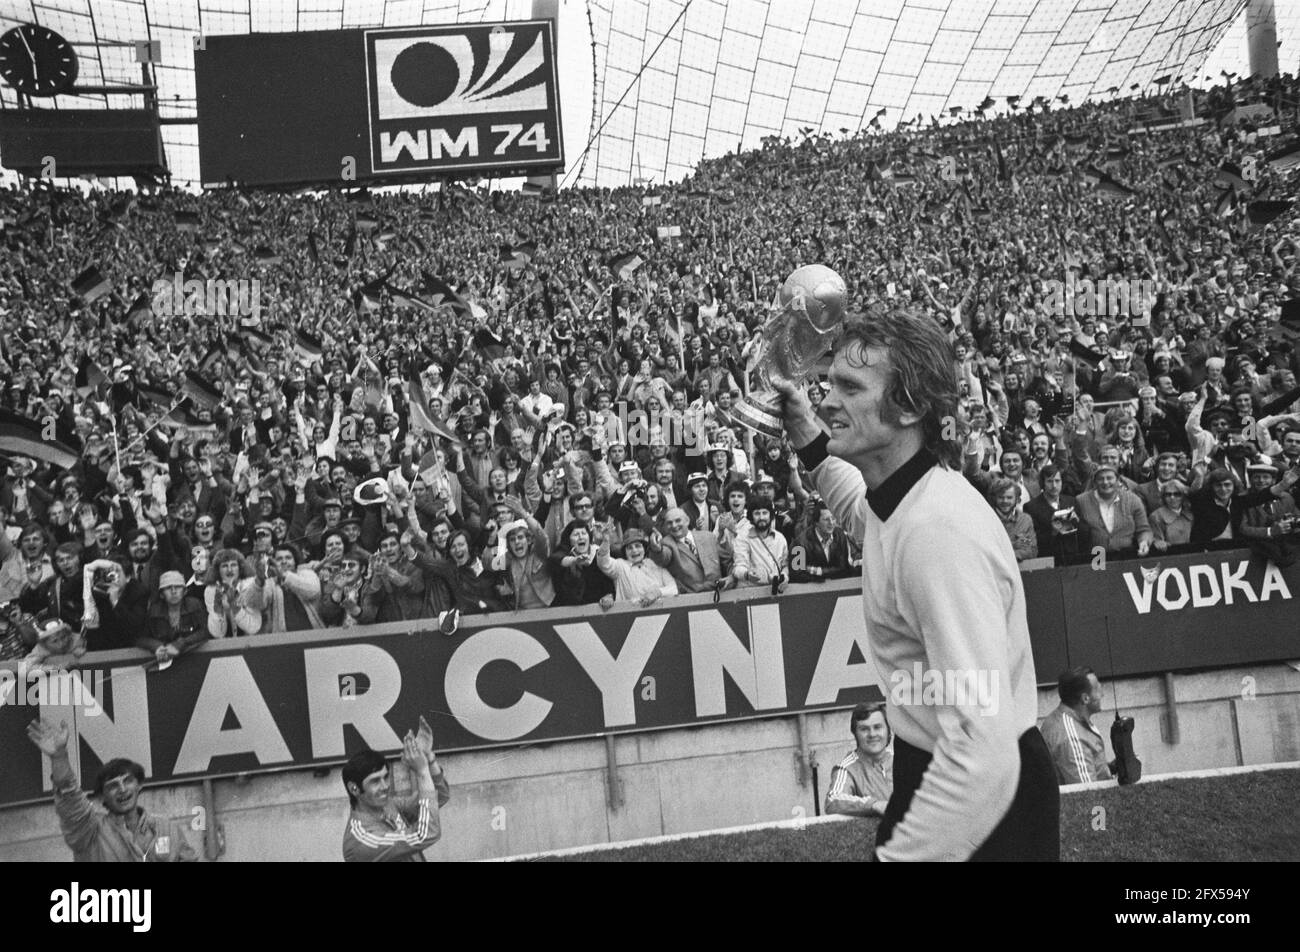 World Cup final 1974 in Munich, West Germany v. Netherlands 2-1; Sepp Maier with world cup past audience, July 7, 1974, finals, audience, sports, soccer, world championships, The Netherlands, 20th century press agency photo, news to remember, documentary, historic photography 1945-1990, visual stories, human history of the Twentieth Century, capturing moments in time Stock Photo